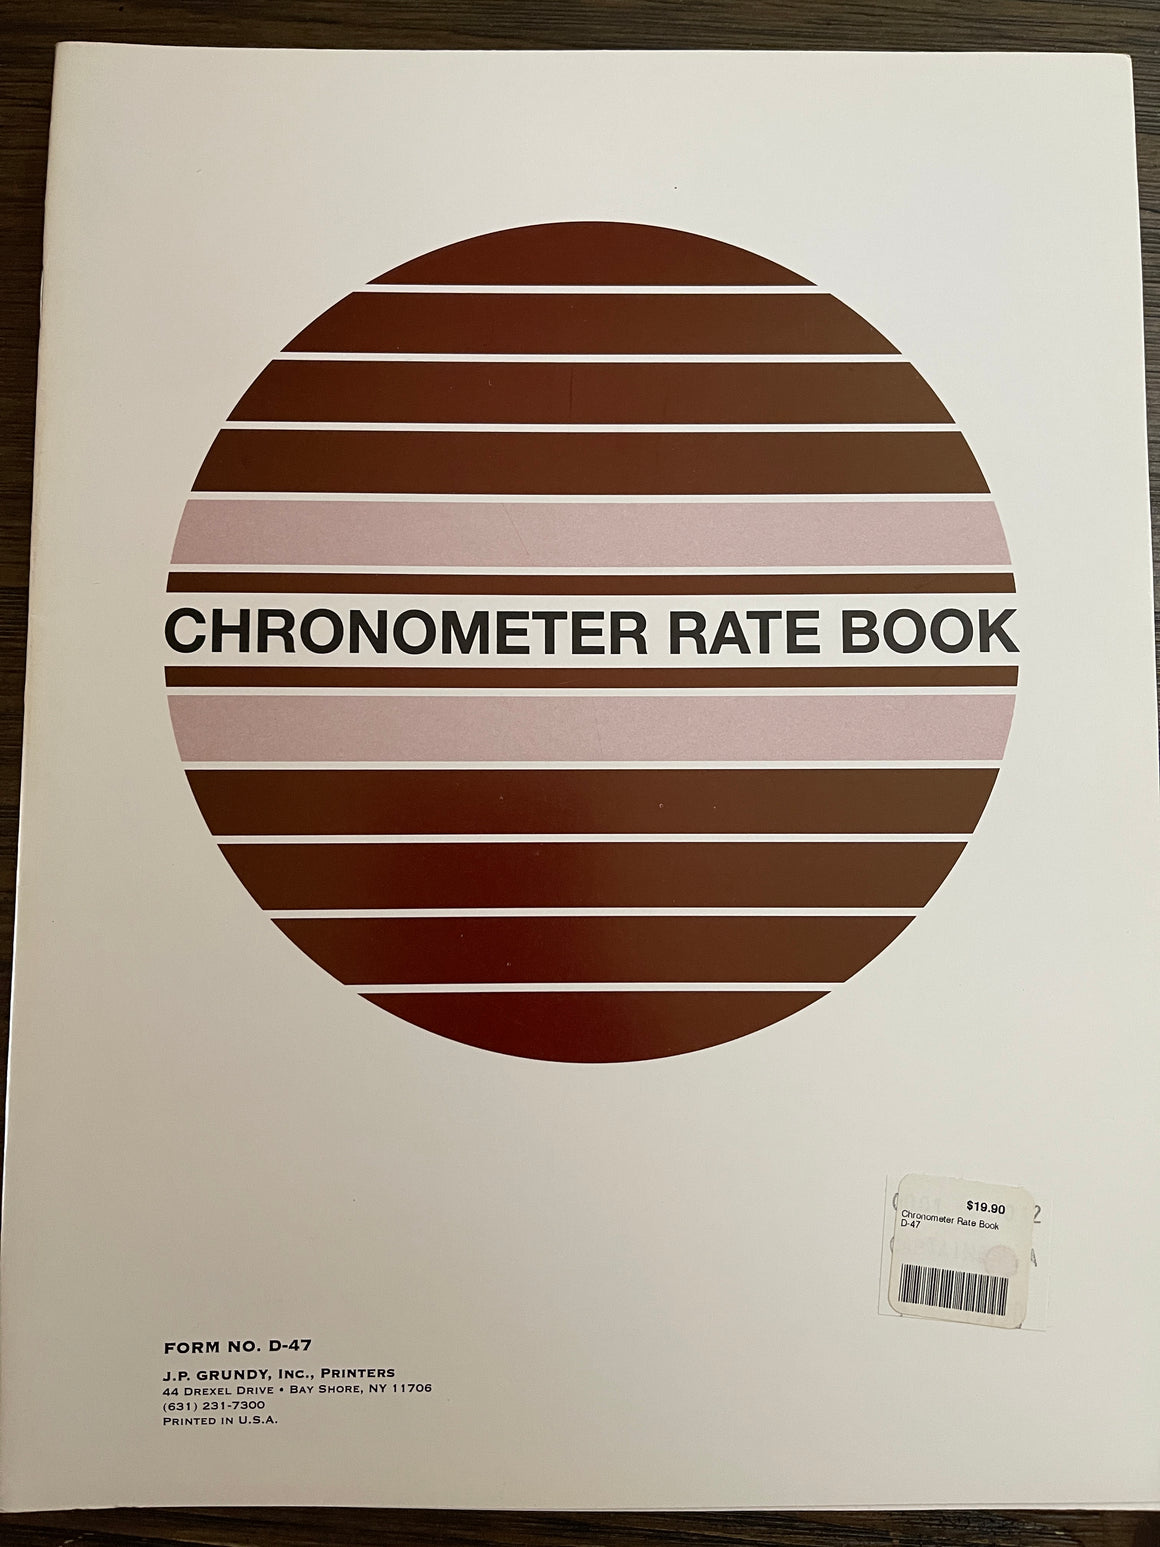 Chronometer Rate Book (Form D-47)